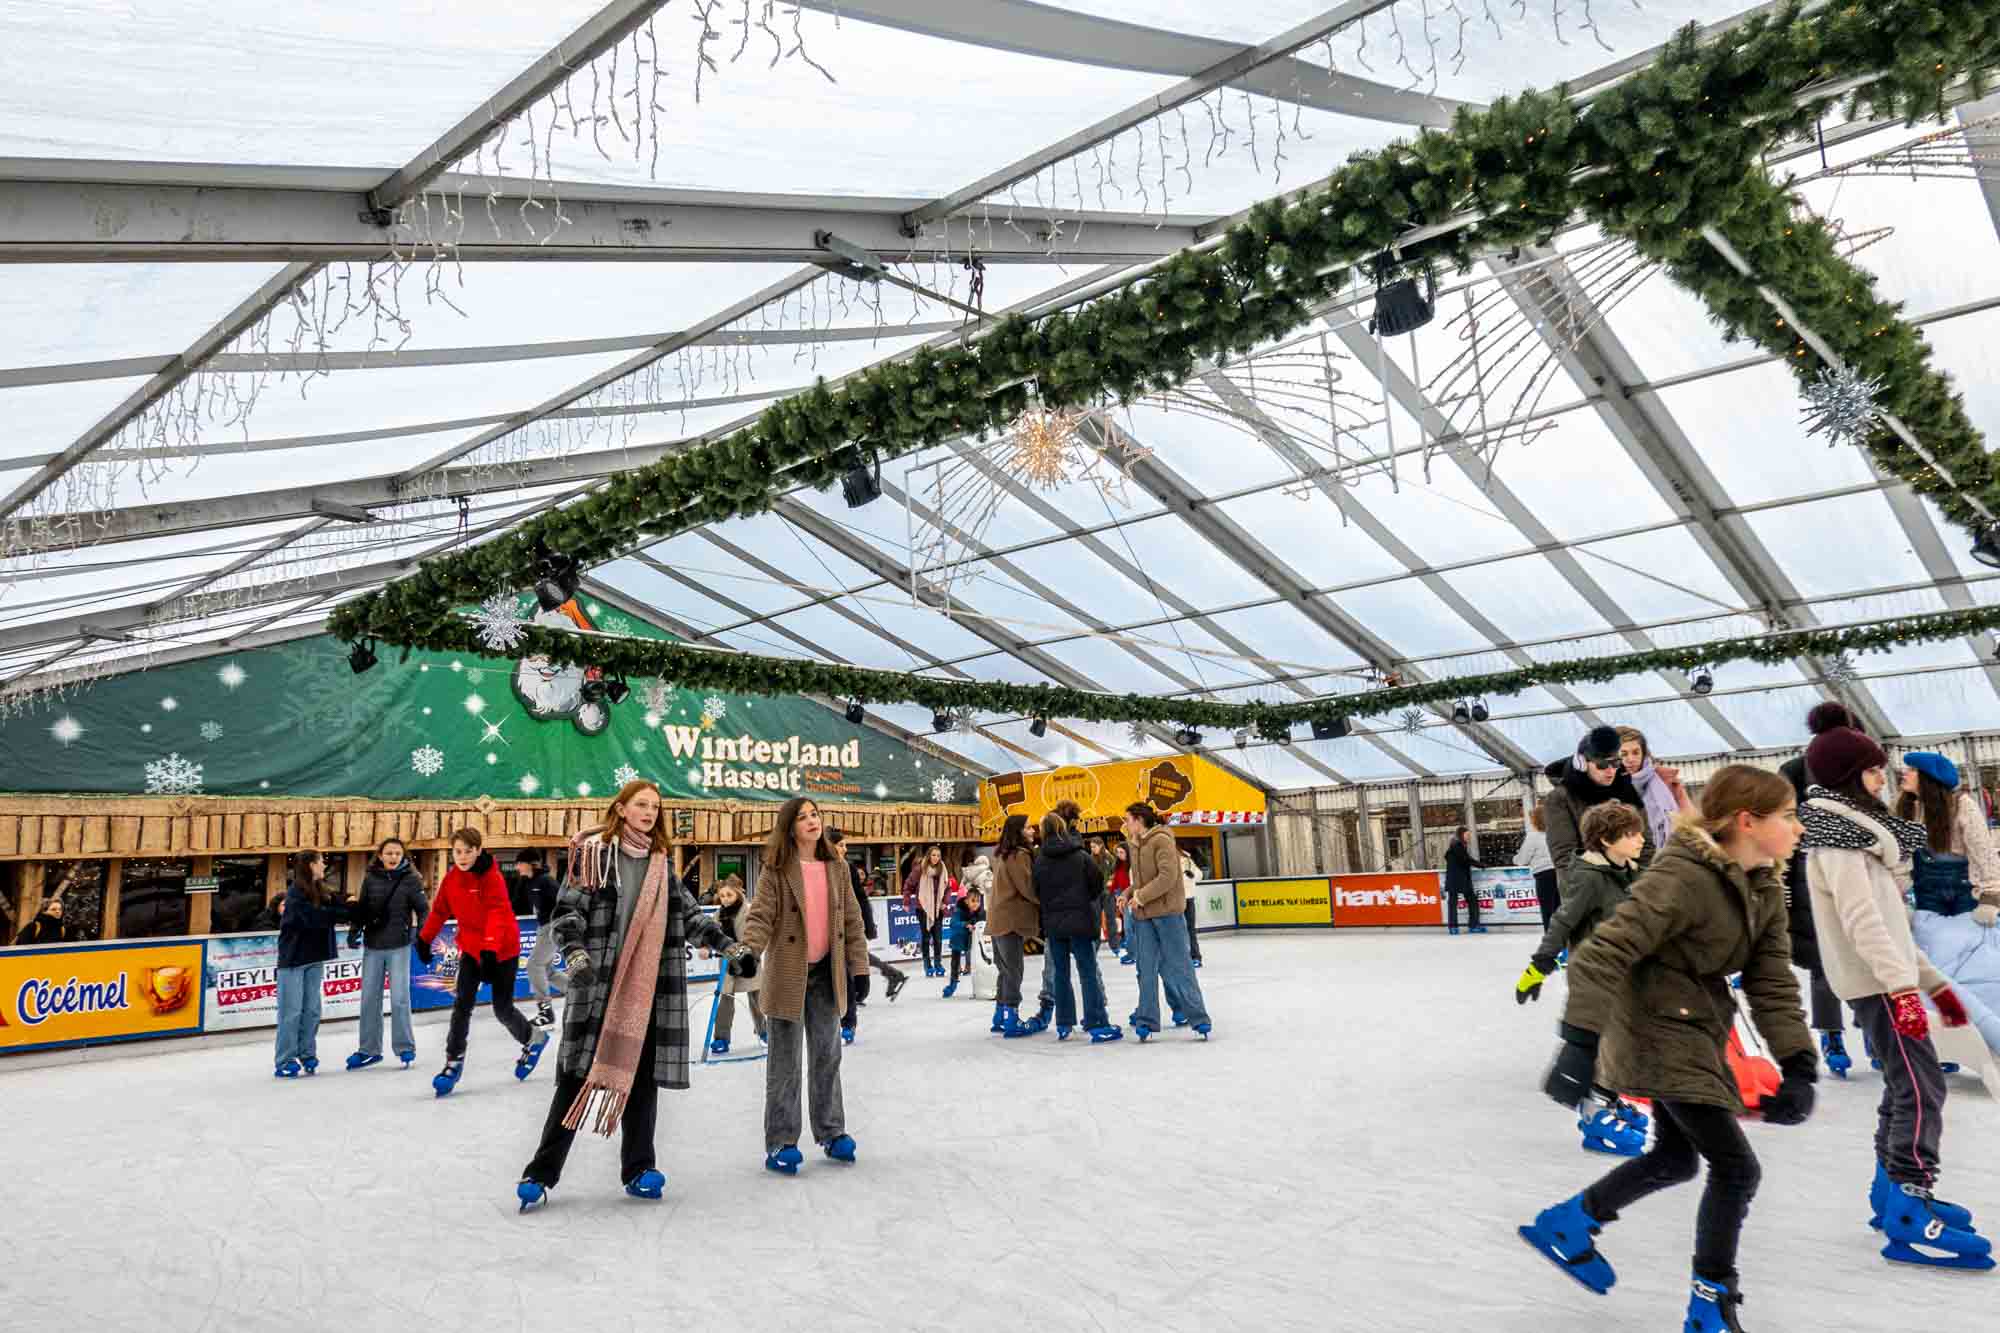 People skating on a covered ice skating rink at a Christmas market